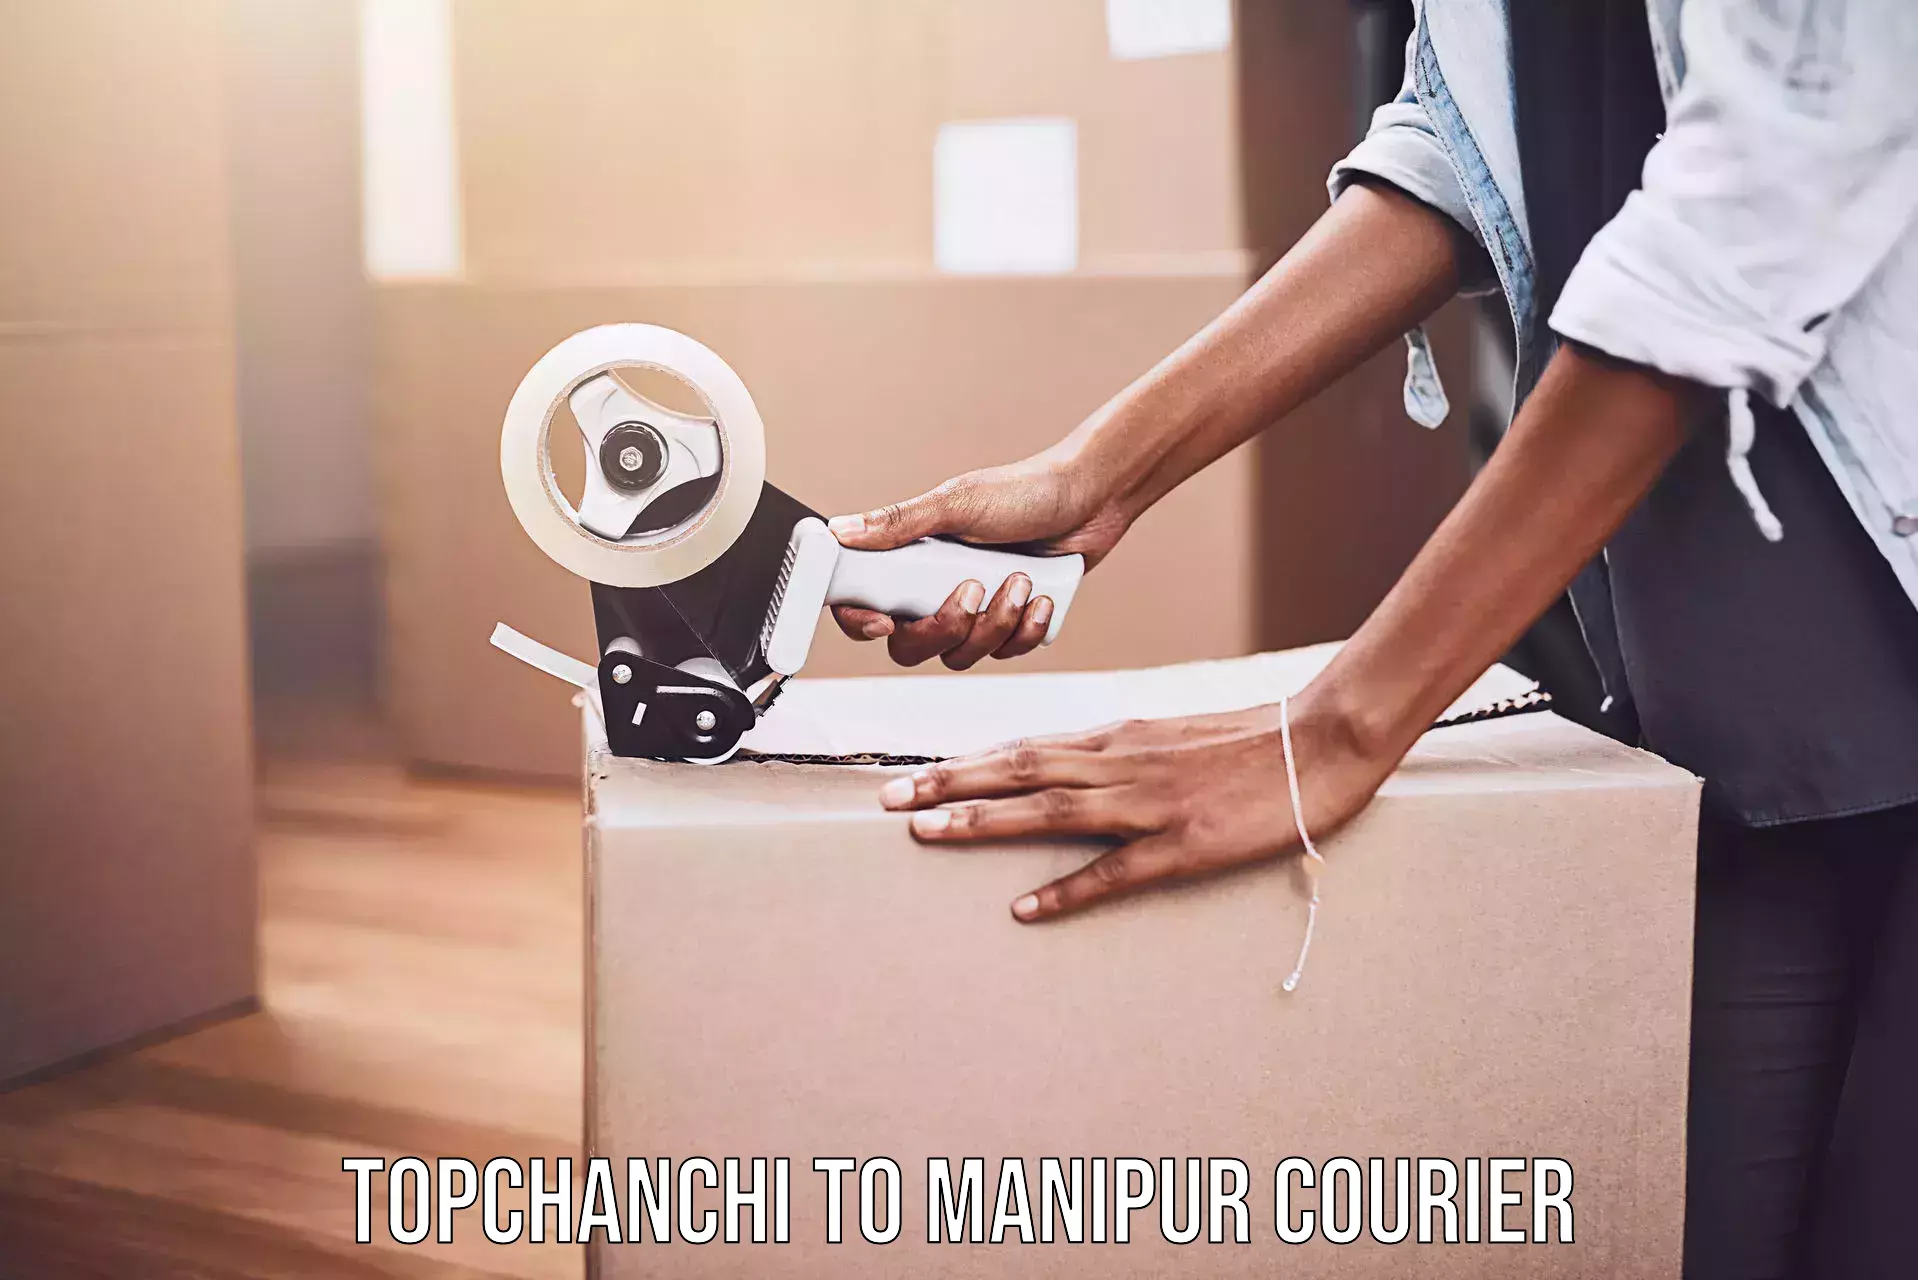 Easy return solutions Topchanchi to Manipur